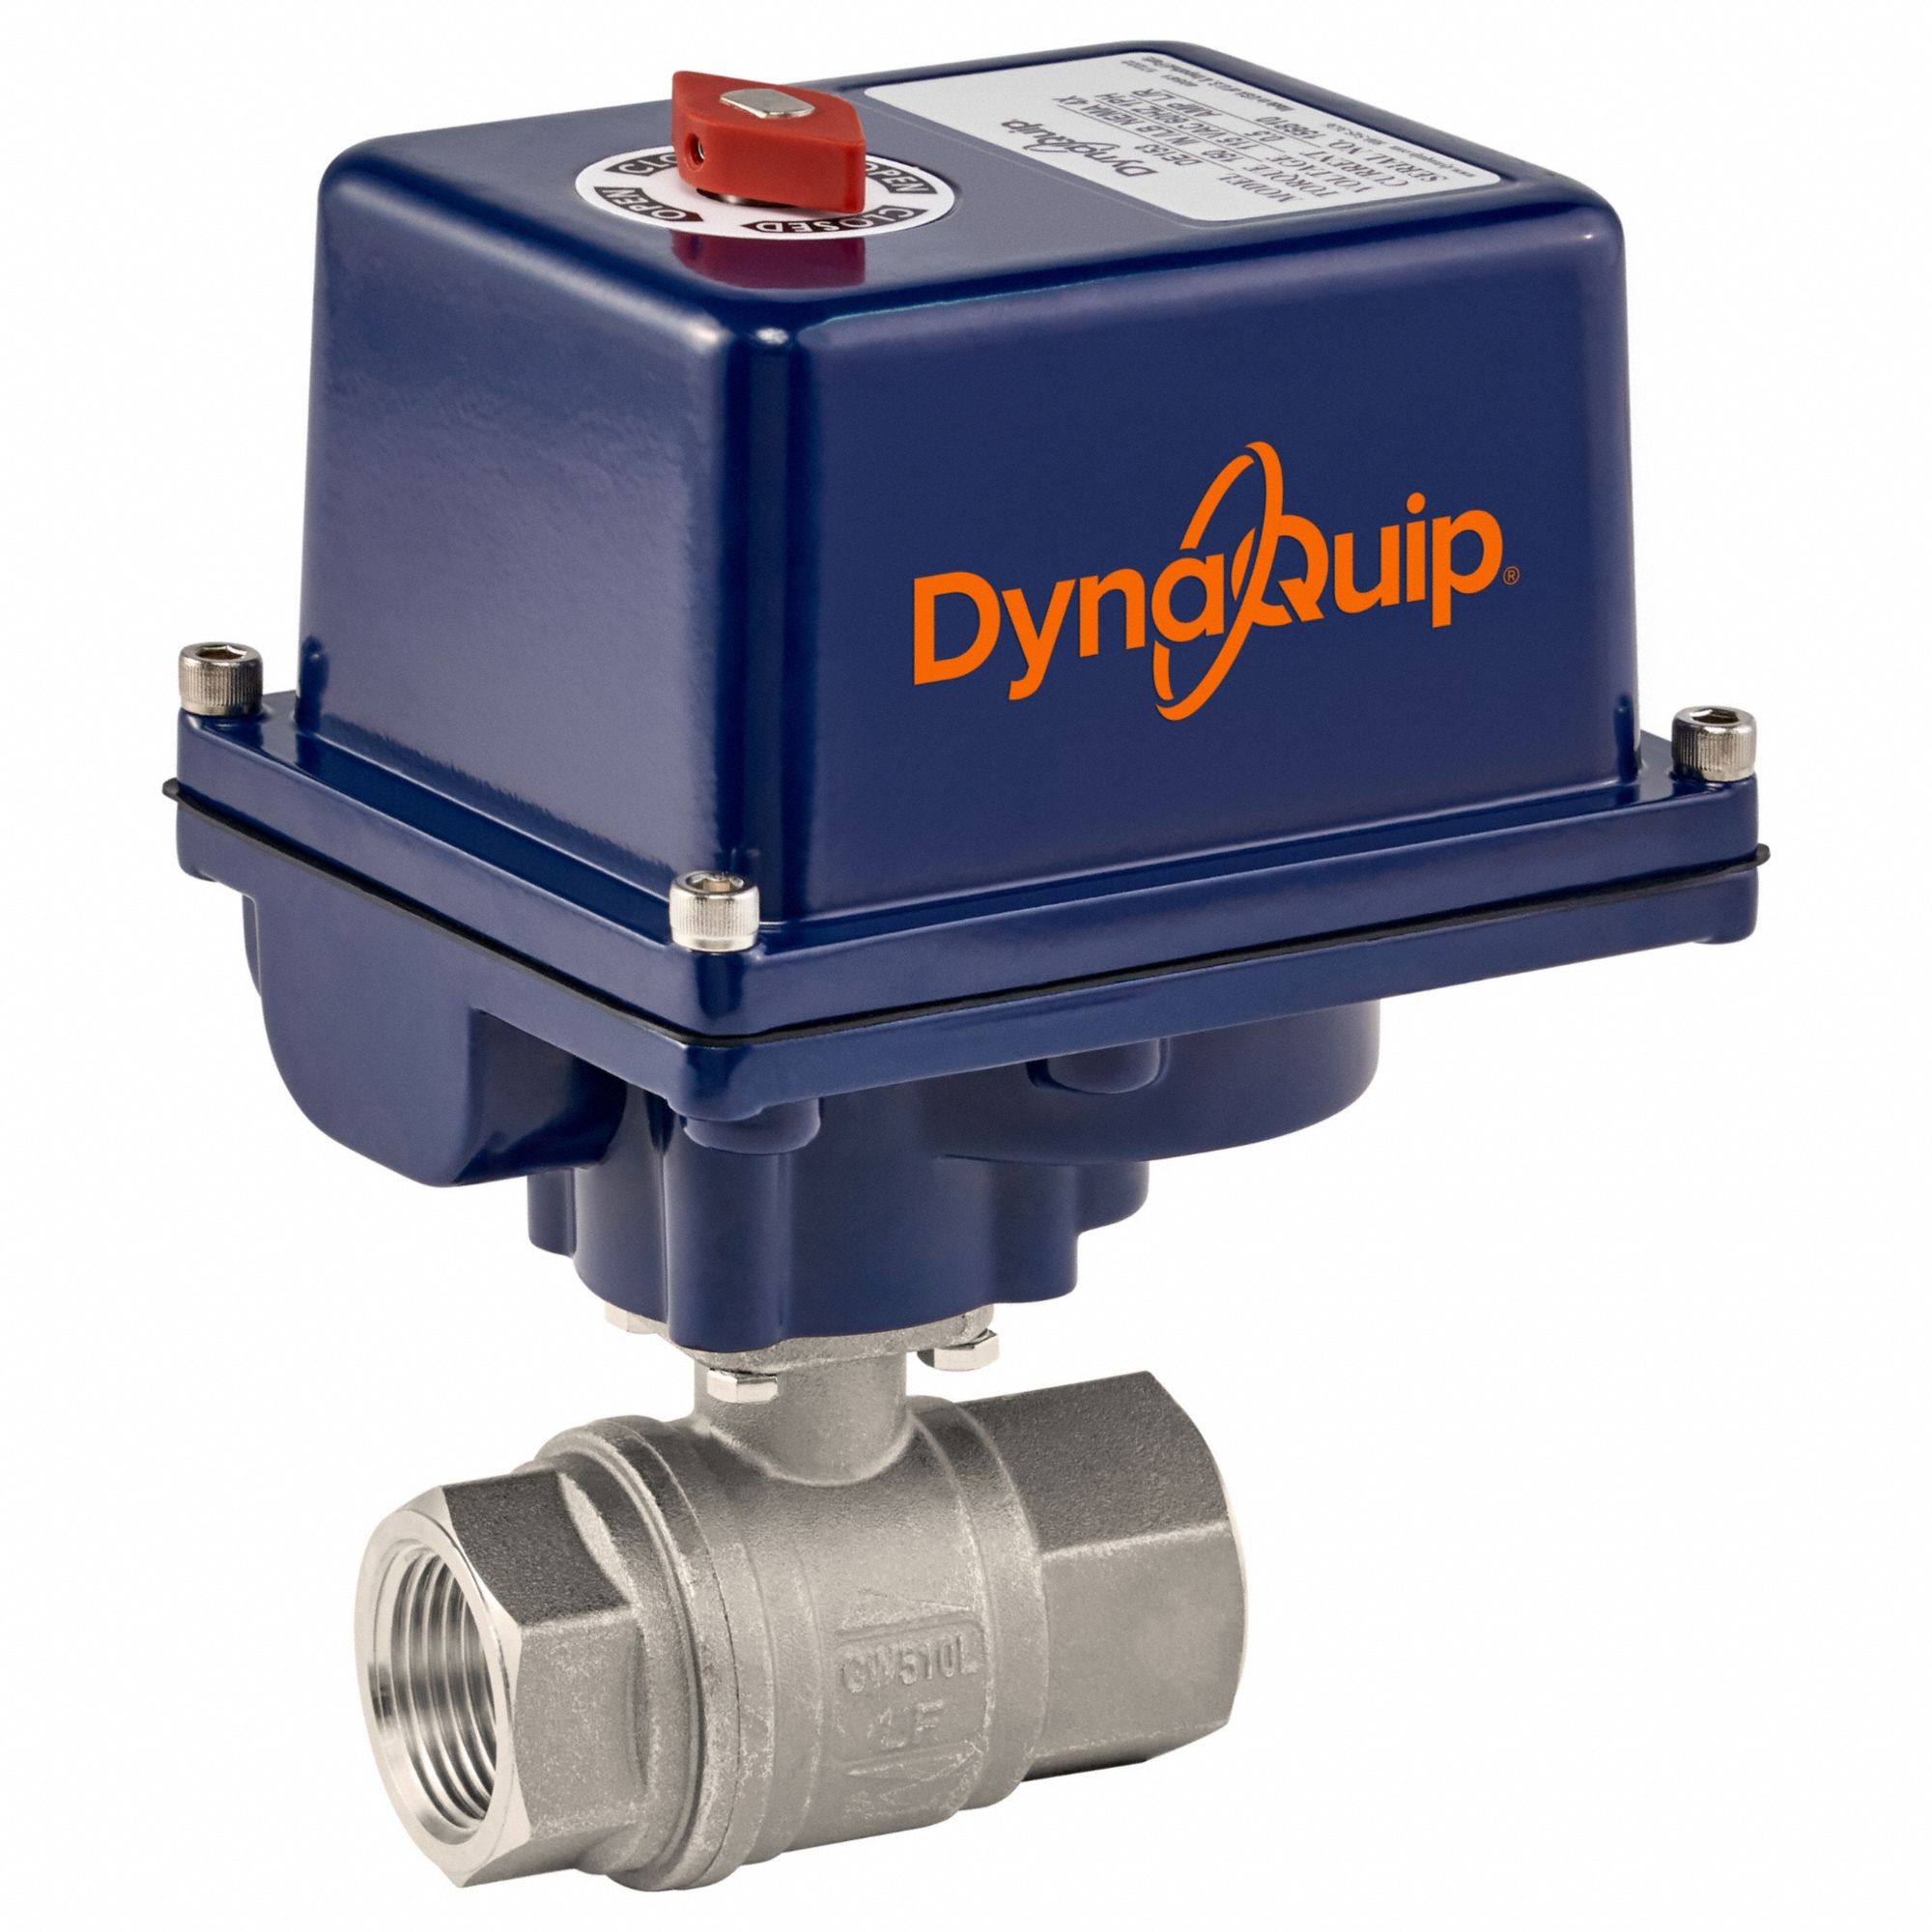 DYNAQUIP CONTROLS E2S21AJE23 Electronic Ball ValveSS1/4 In.